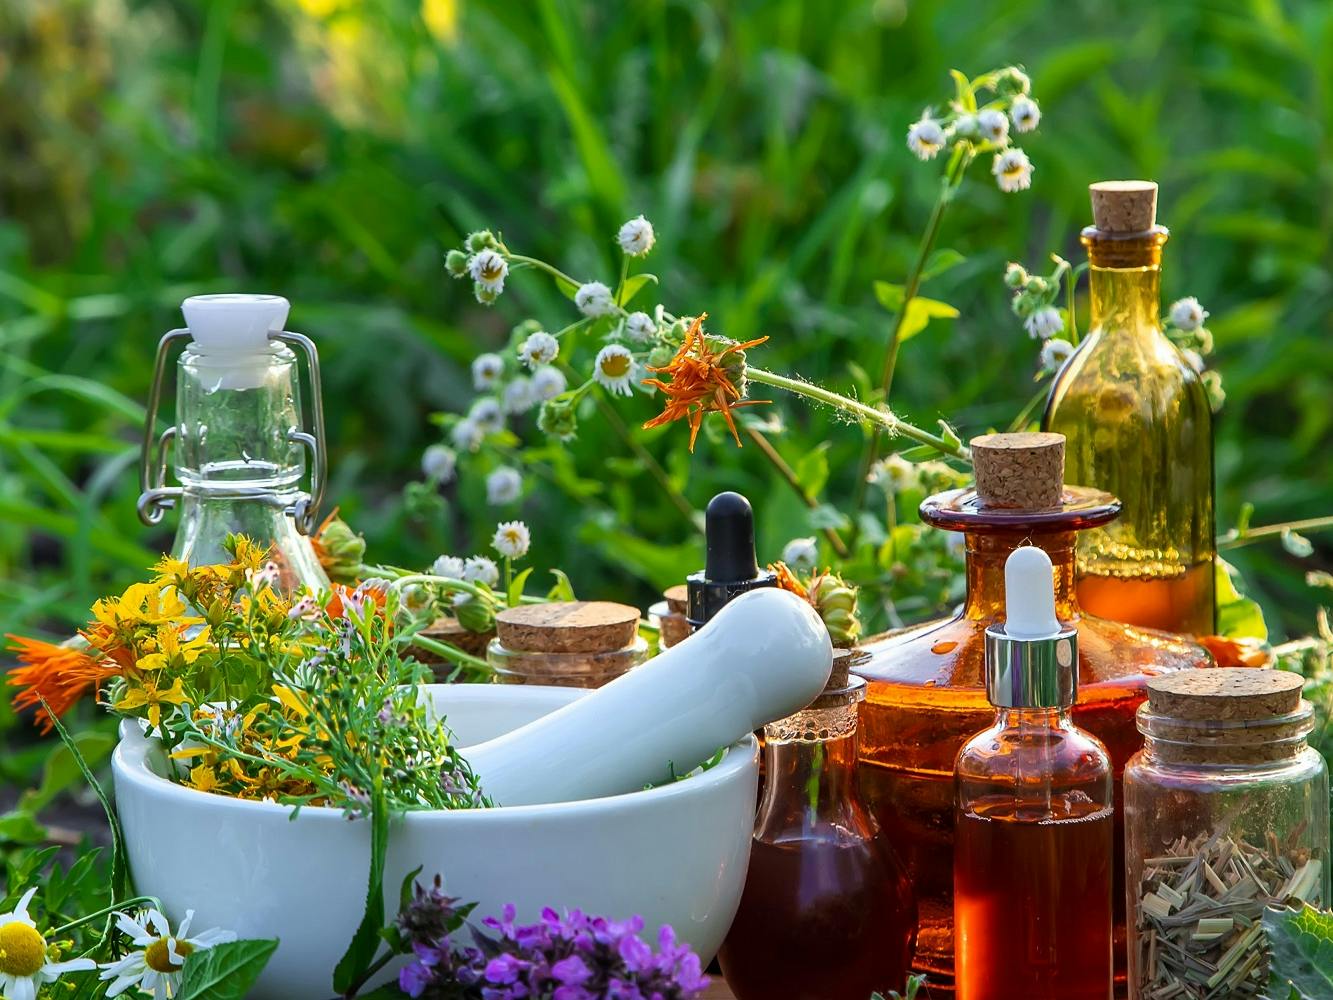 Does Medicare Cover Naturopathy?